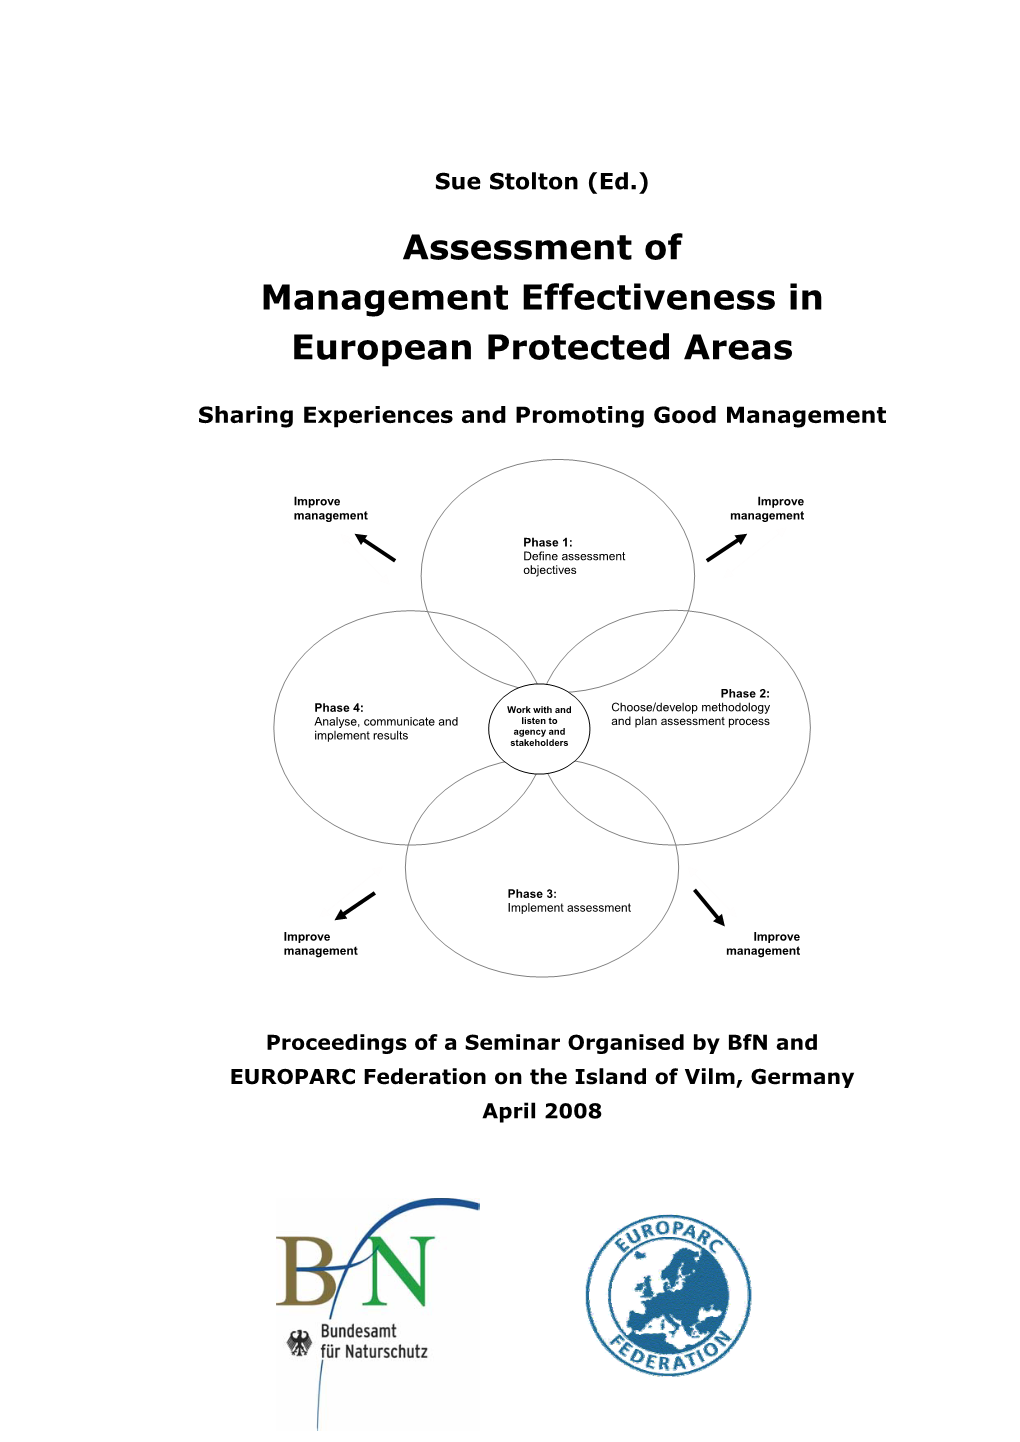 Assessment of Management Effectiveness in European Protected Areas